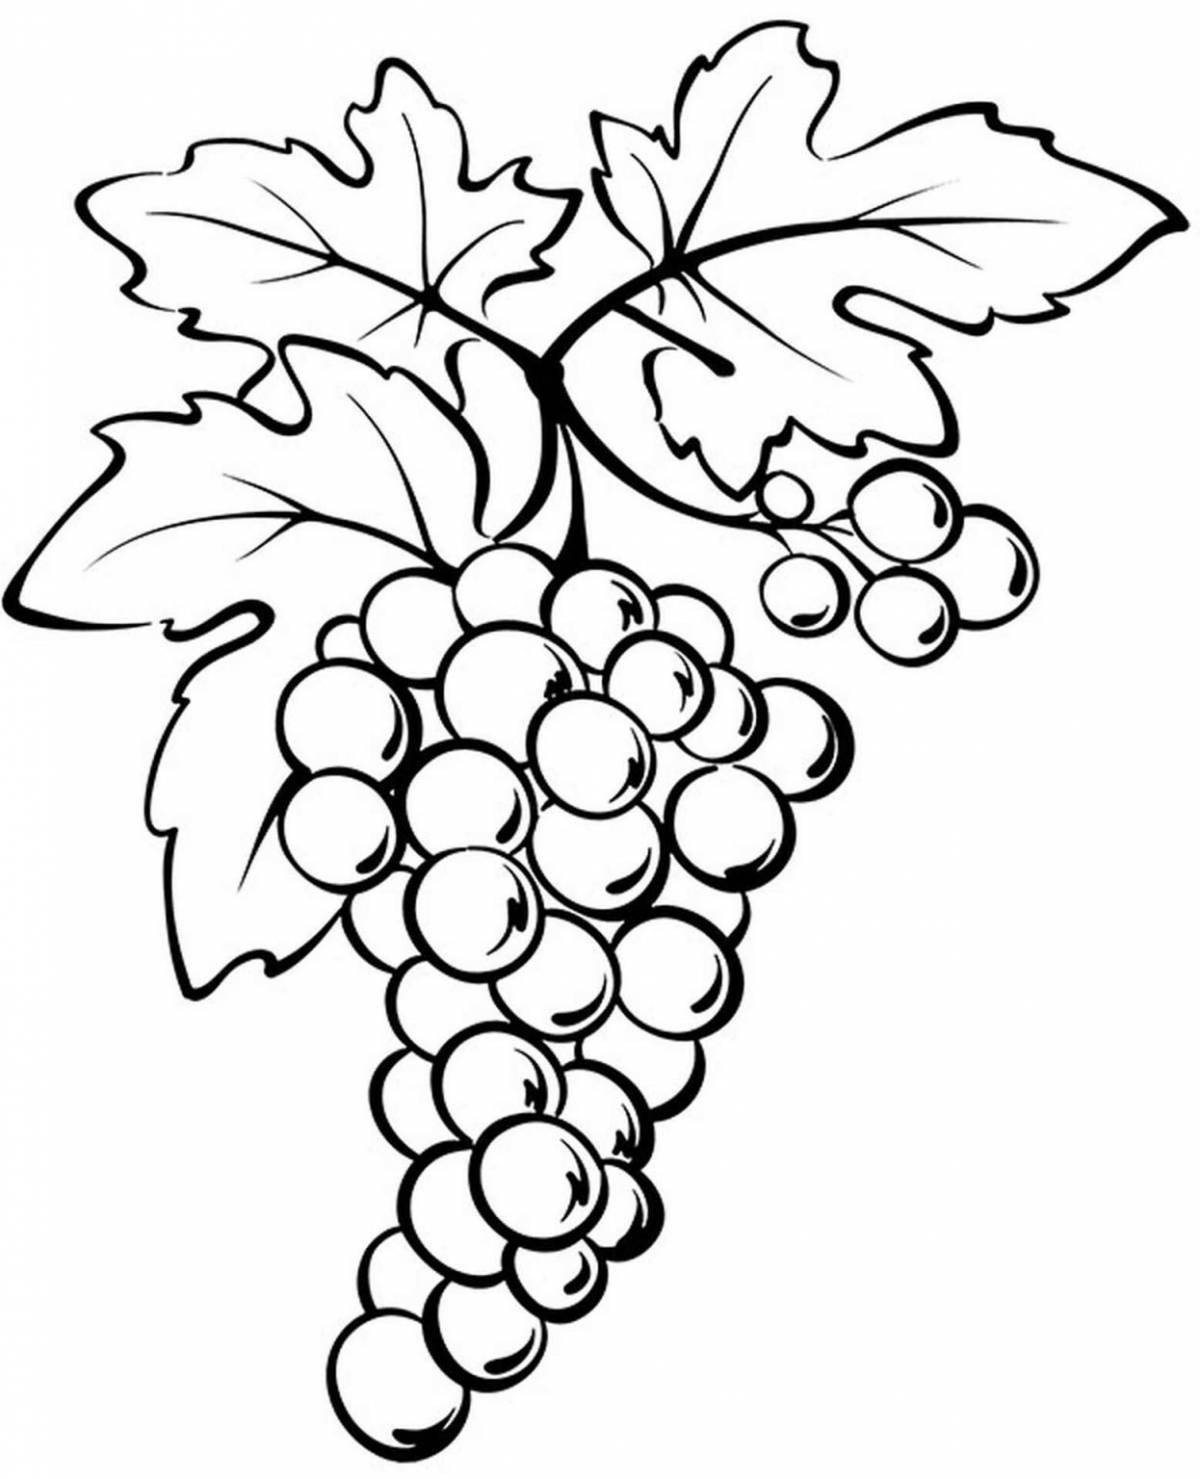 Vibrant grape coloring page for 5-6 year olds